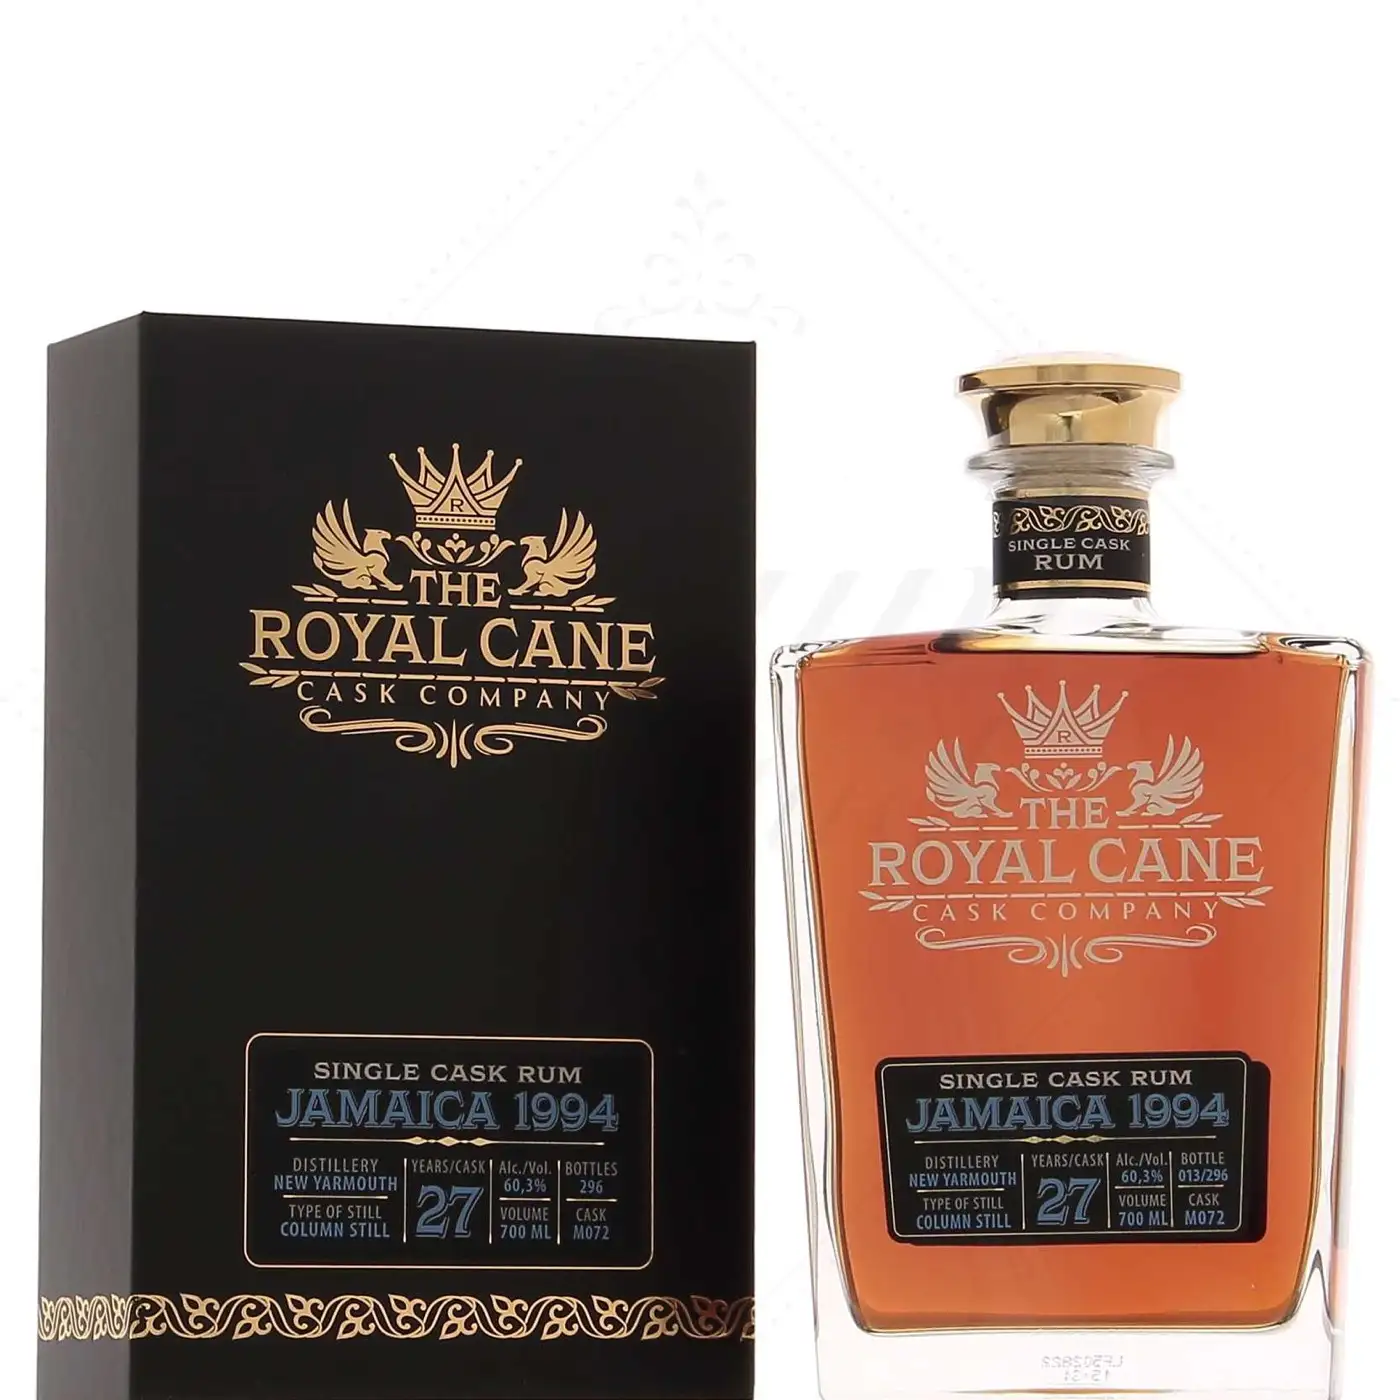 Image of the front of the bottle of the rum The Royal Cane Cask Company